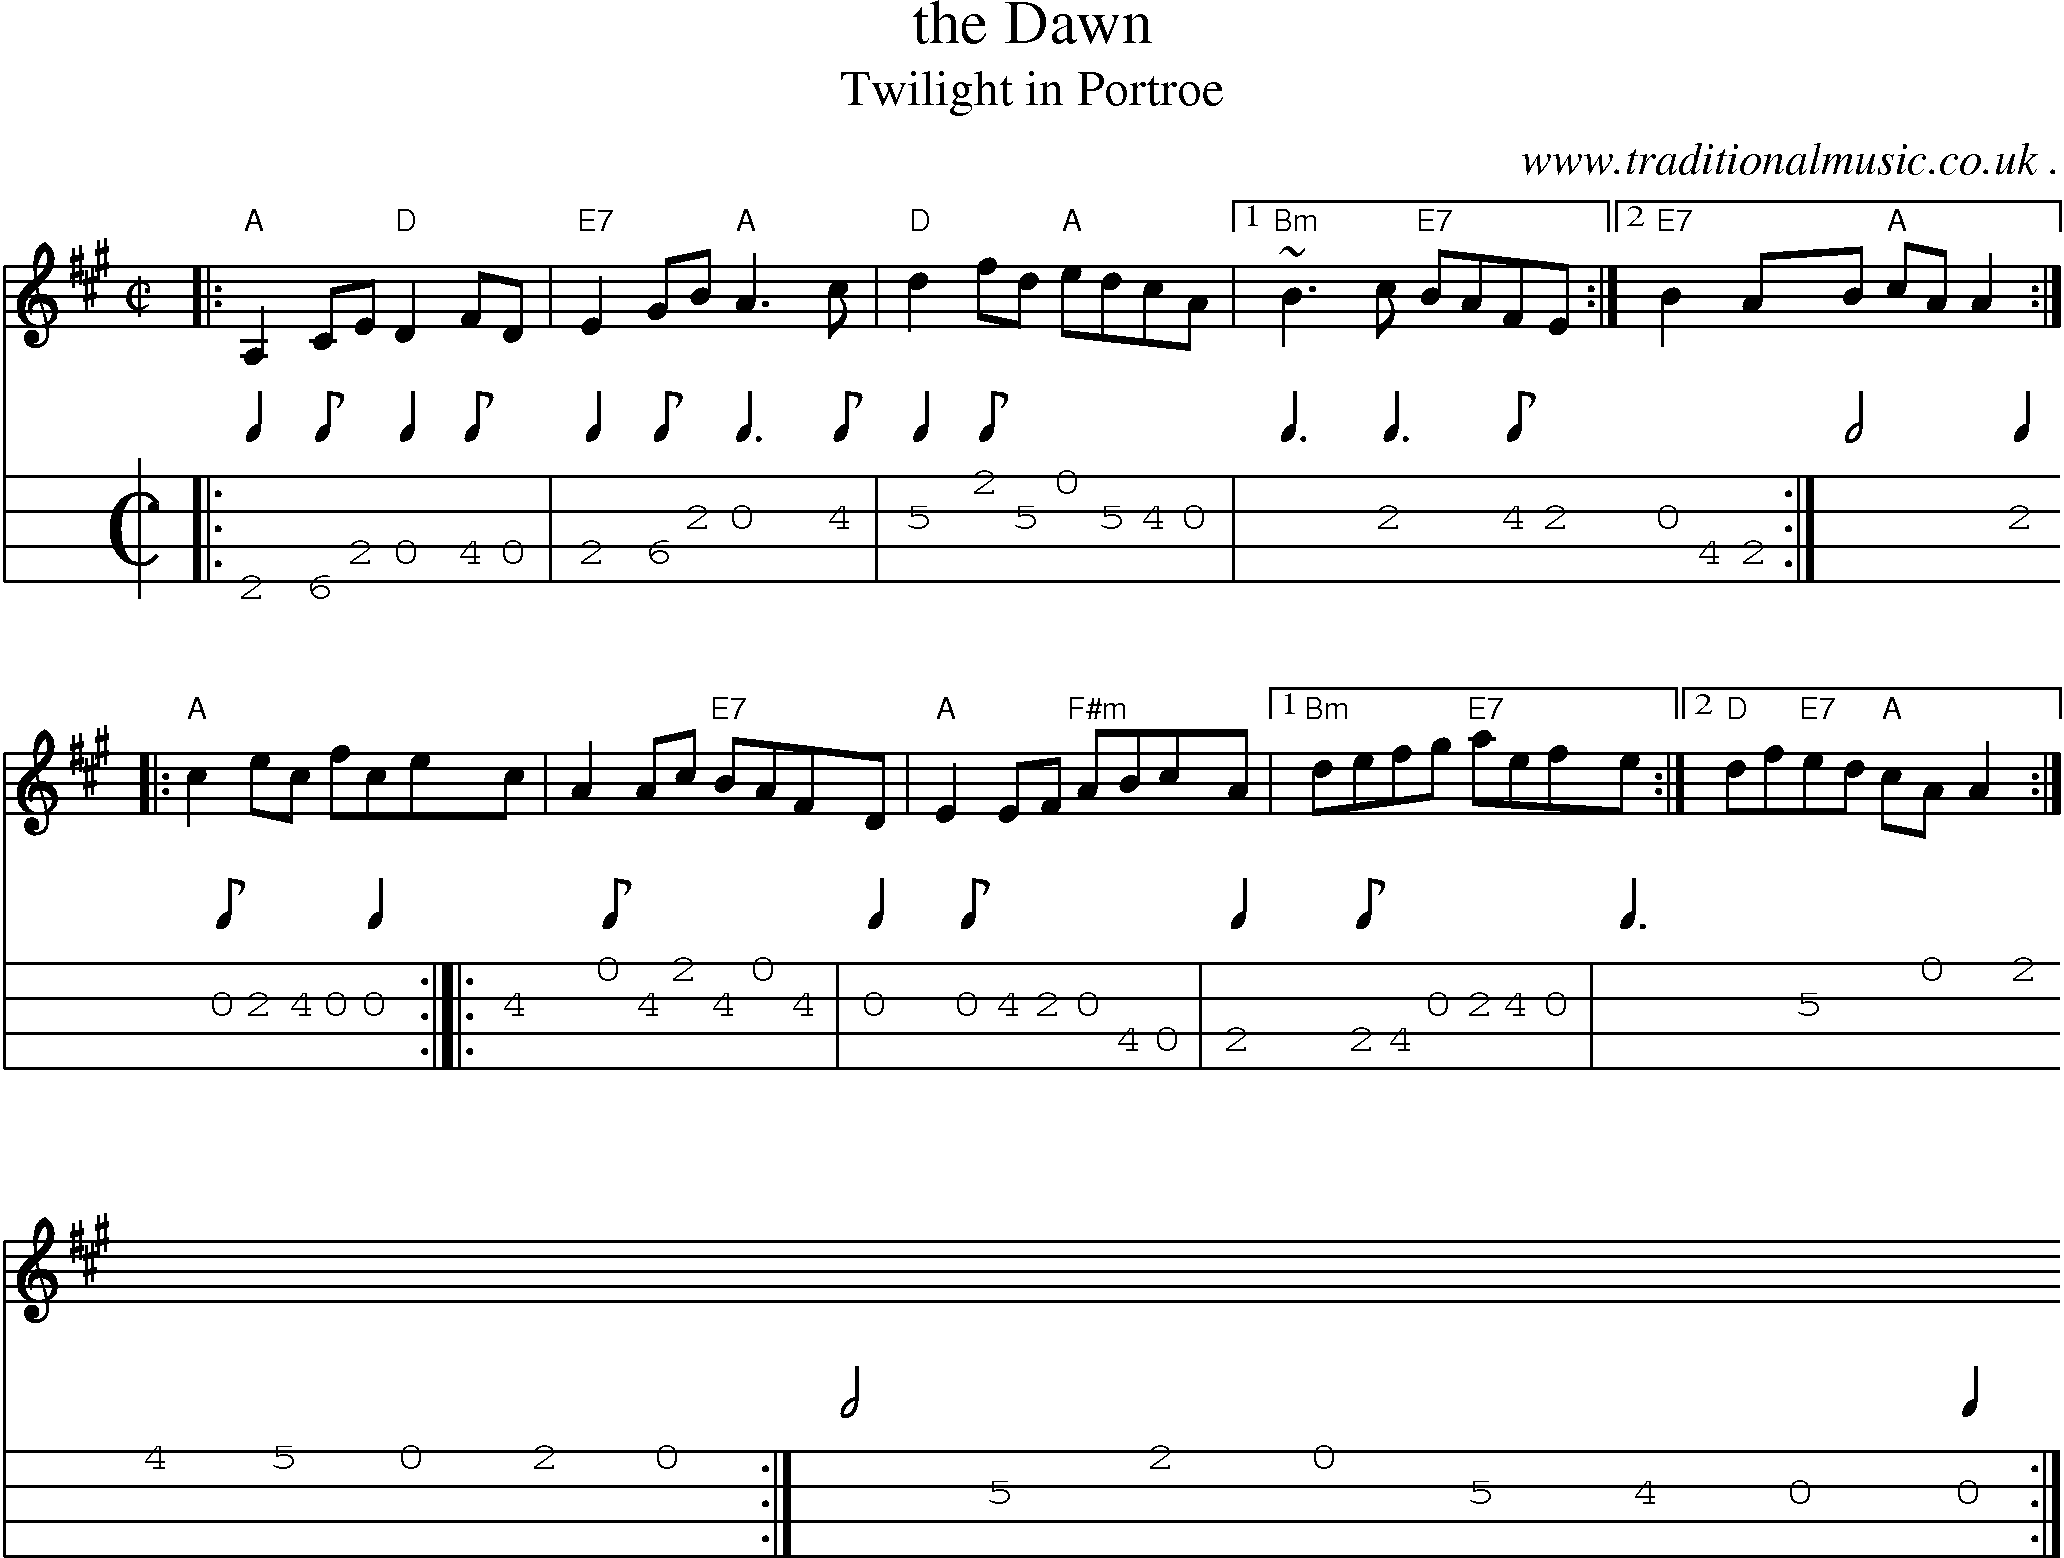 Sheet-music  score, Chords and Mandolin Tabs for The Dawn